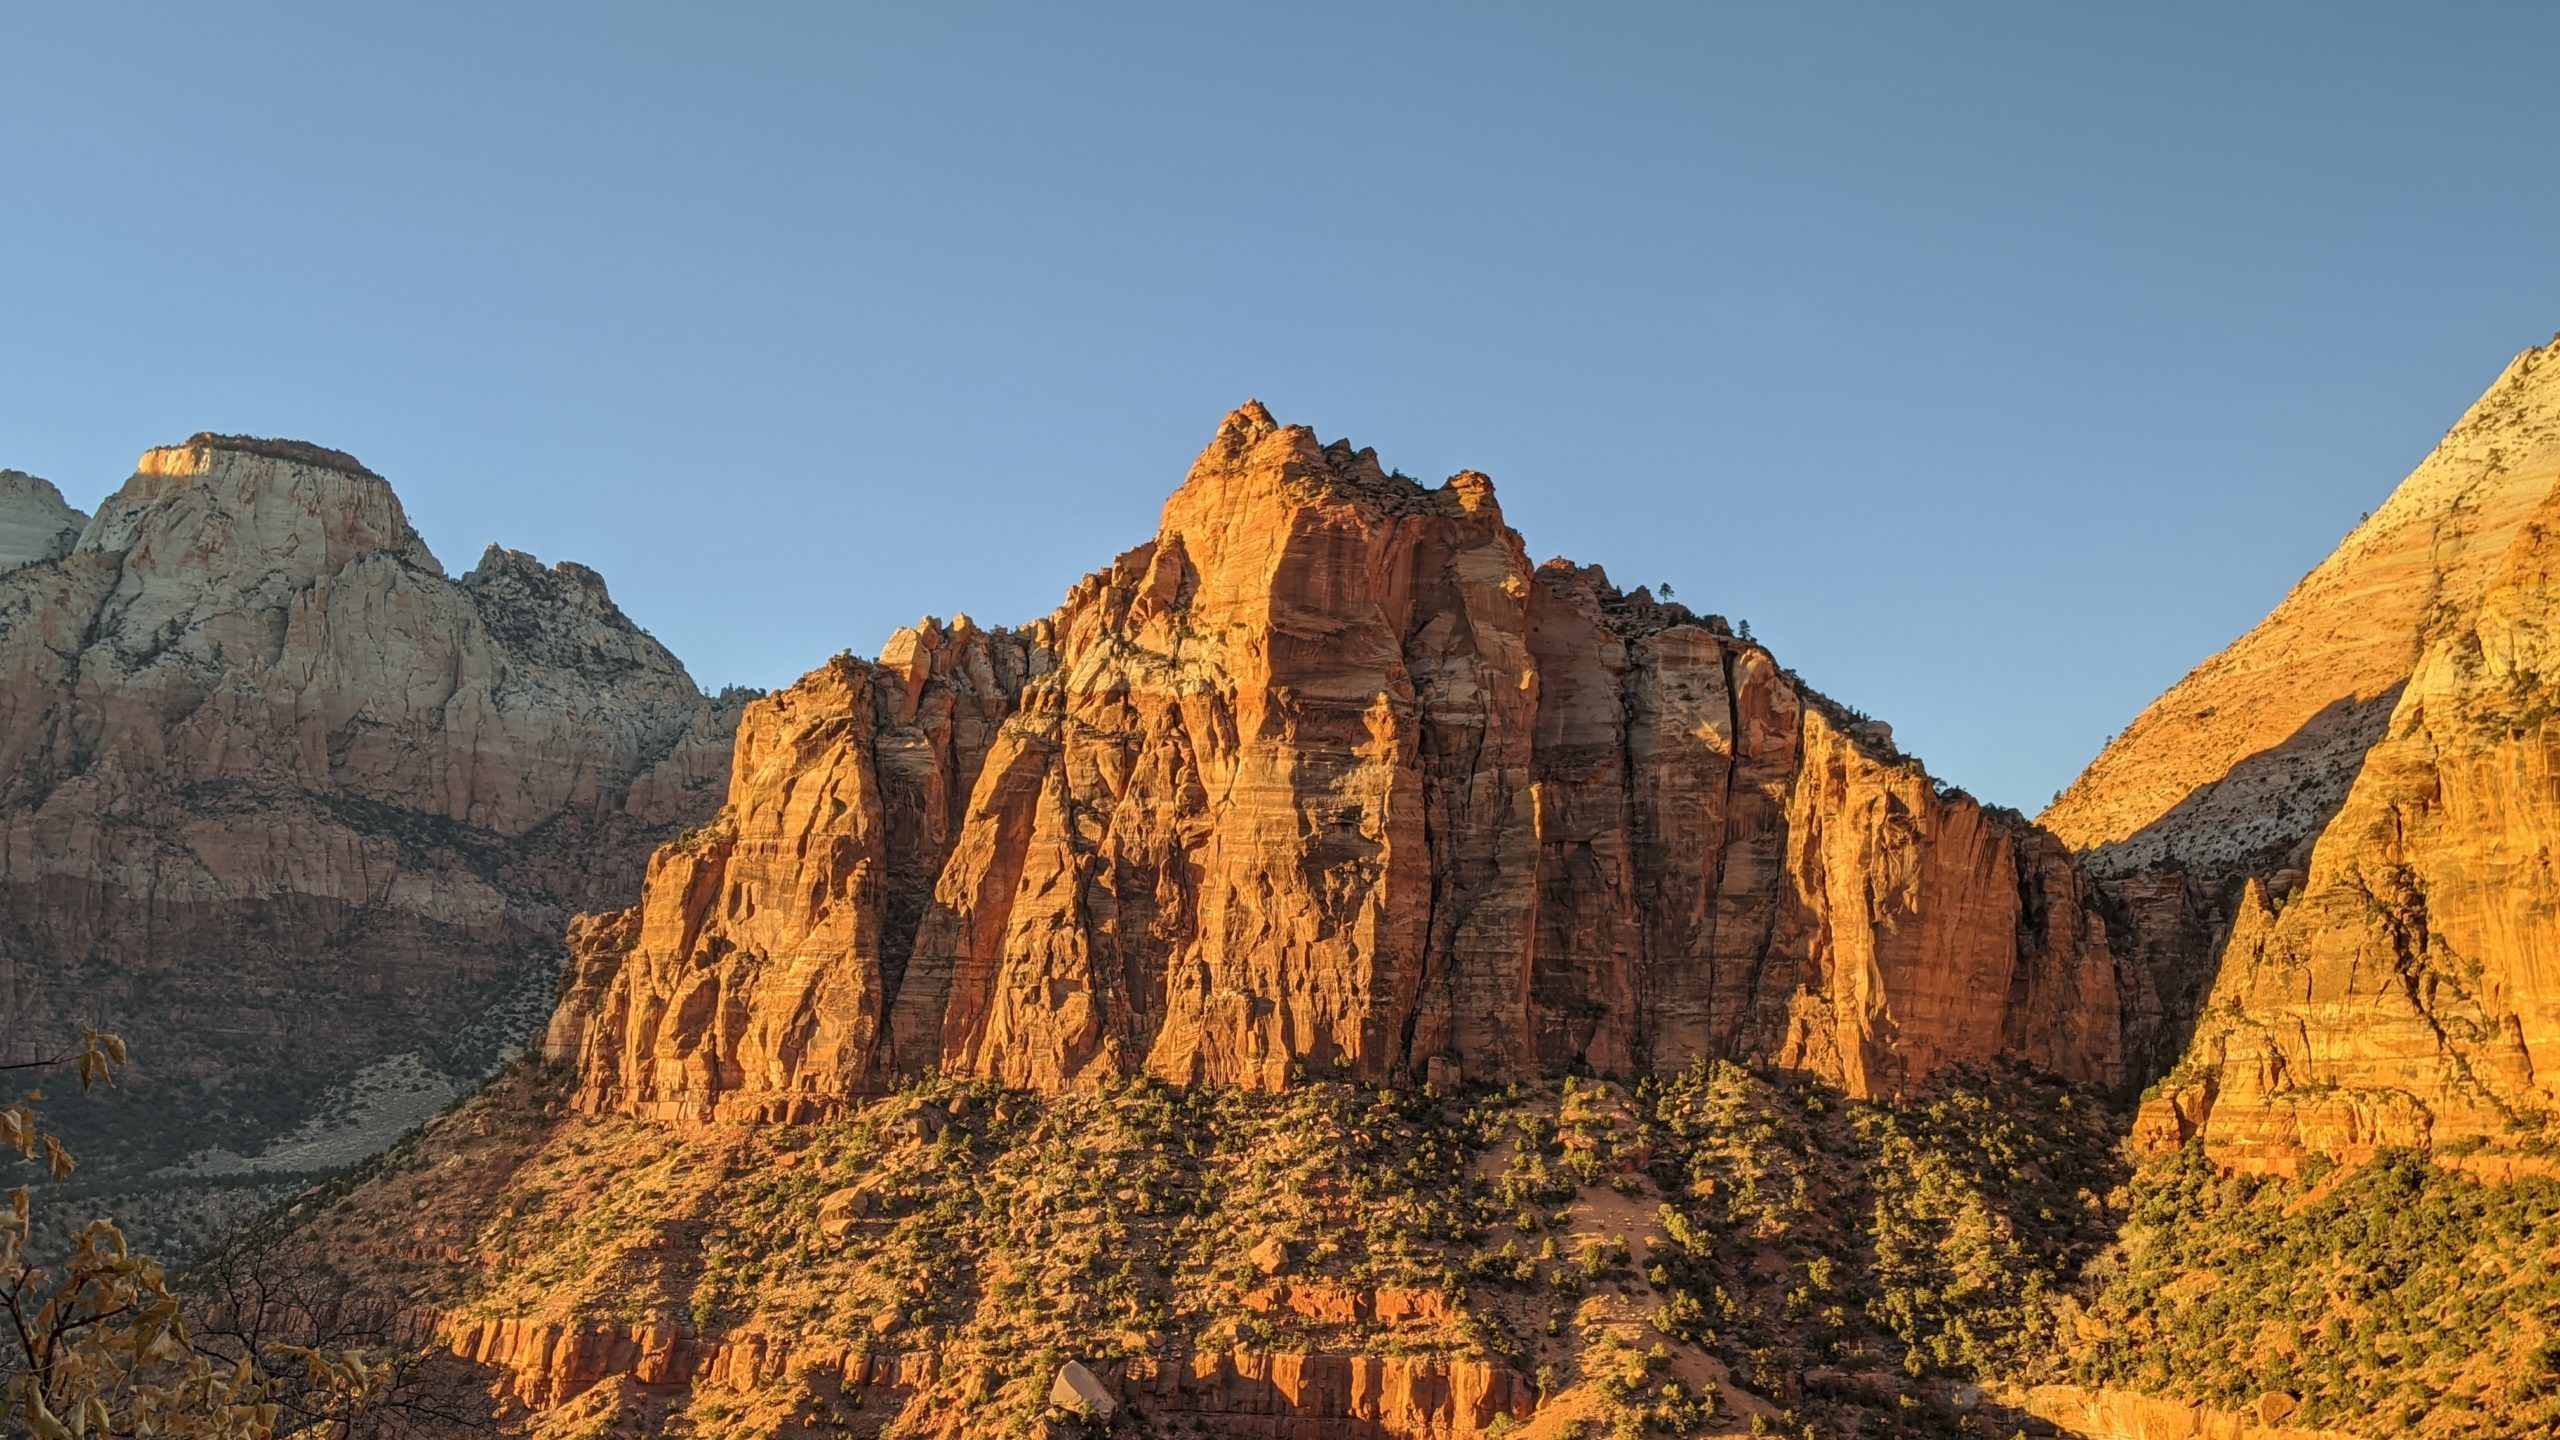 restrictions at Zion National Park...